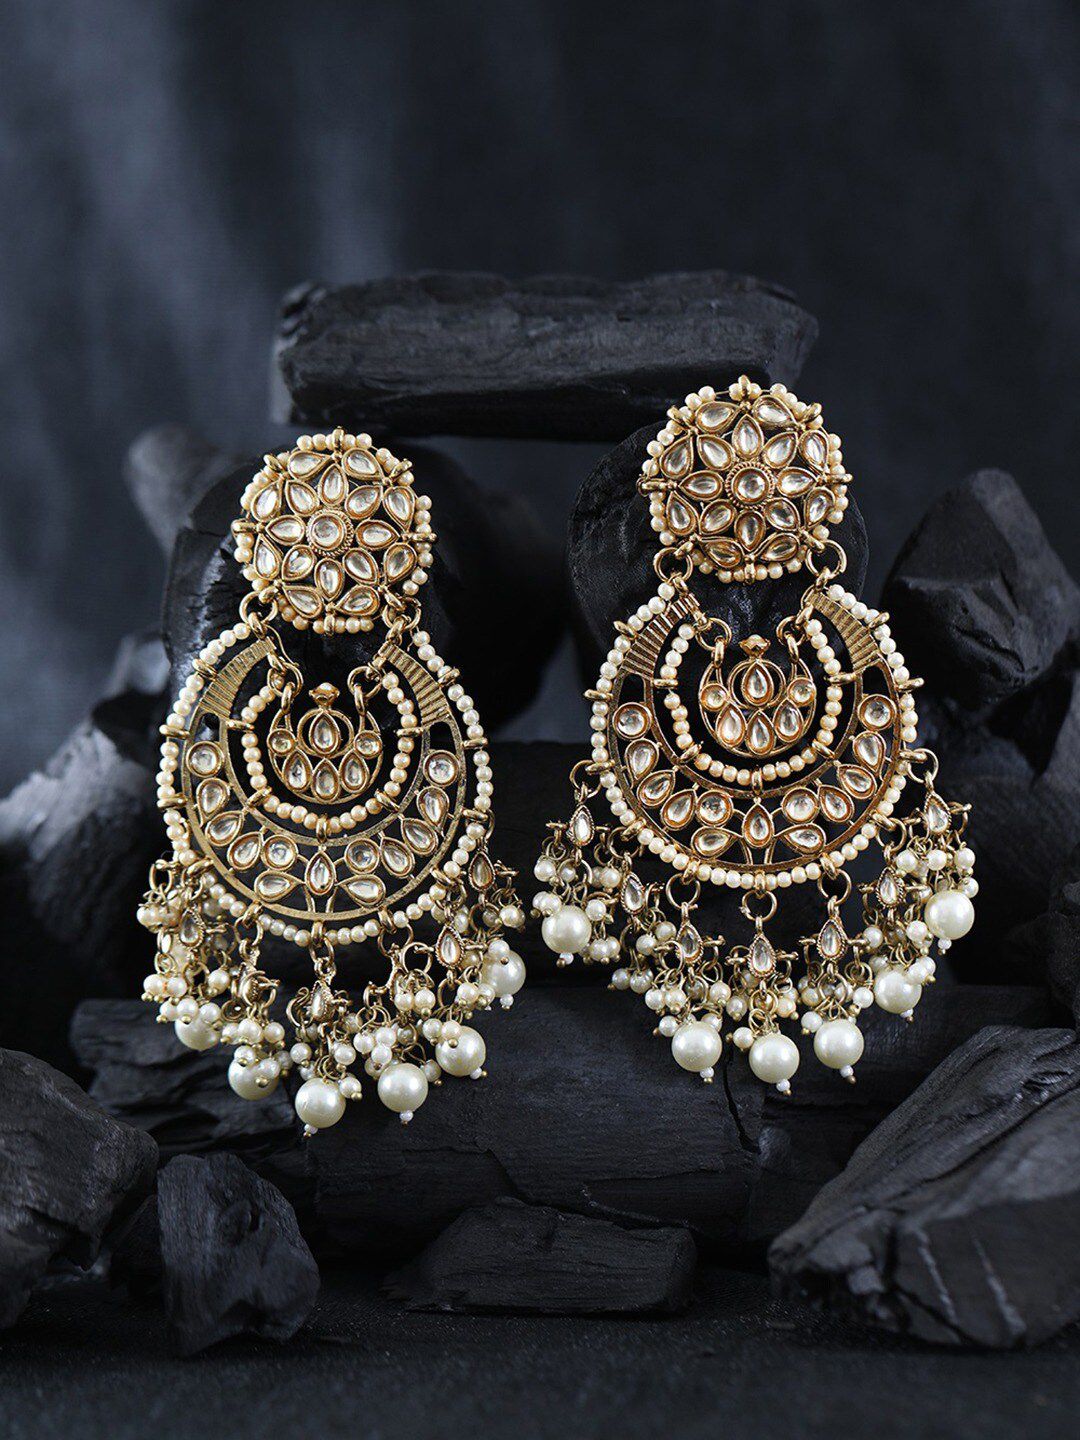 Priyaasi Gold-Toned Stone-Studded Contemporary Chandbalis Earrings With Pearl Drop Price in India